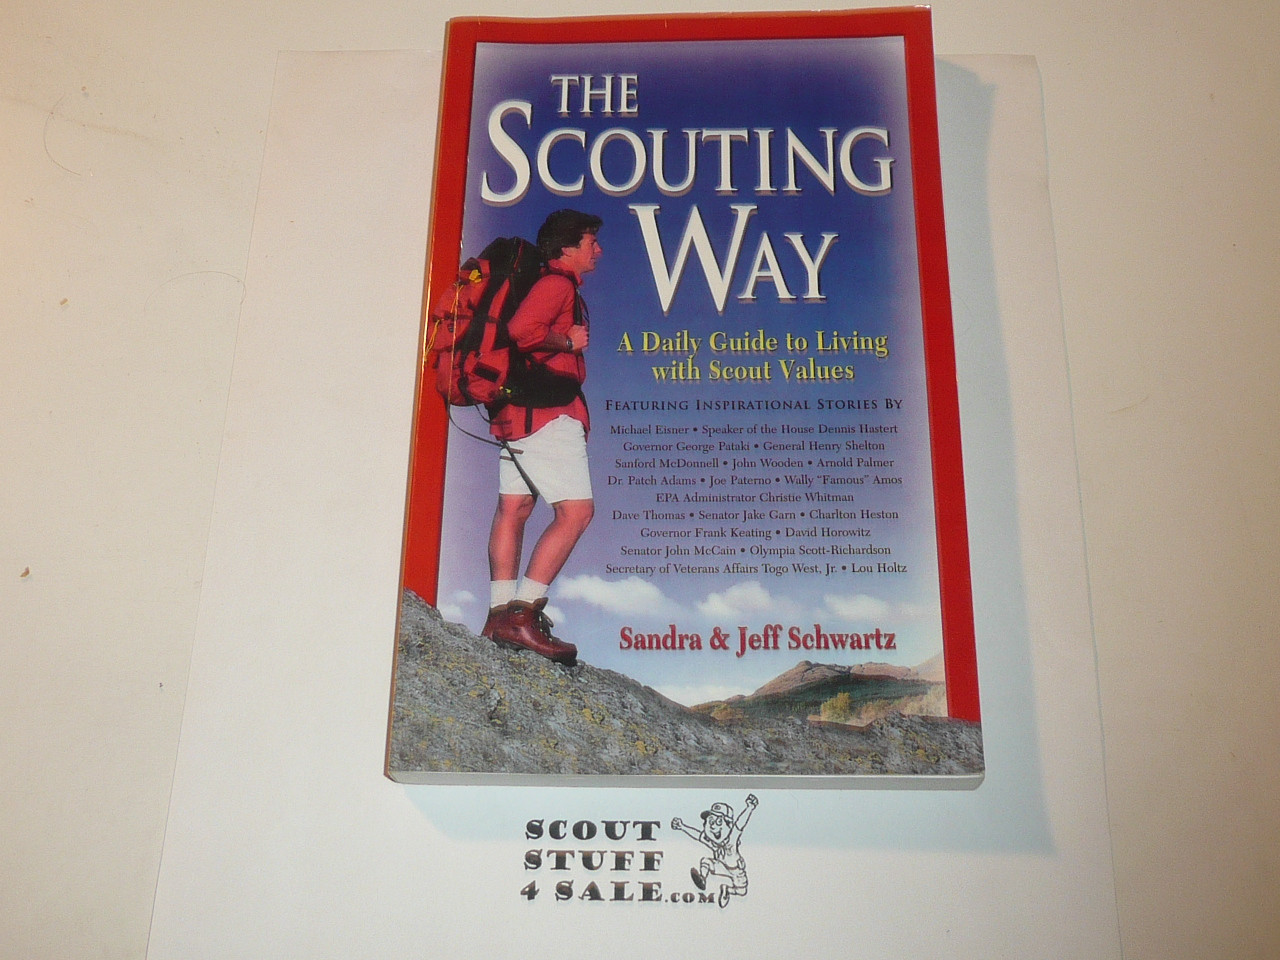 The Scouting Way, A Daily Guide to Living with Scout Values, by Sandra and Jeff Schwartz, 2002 printing